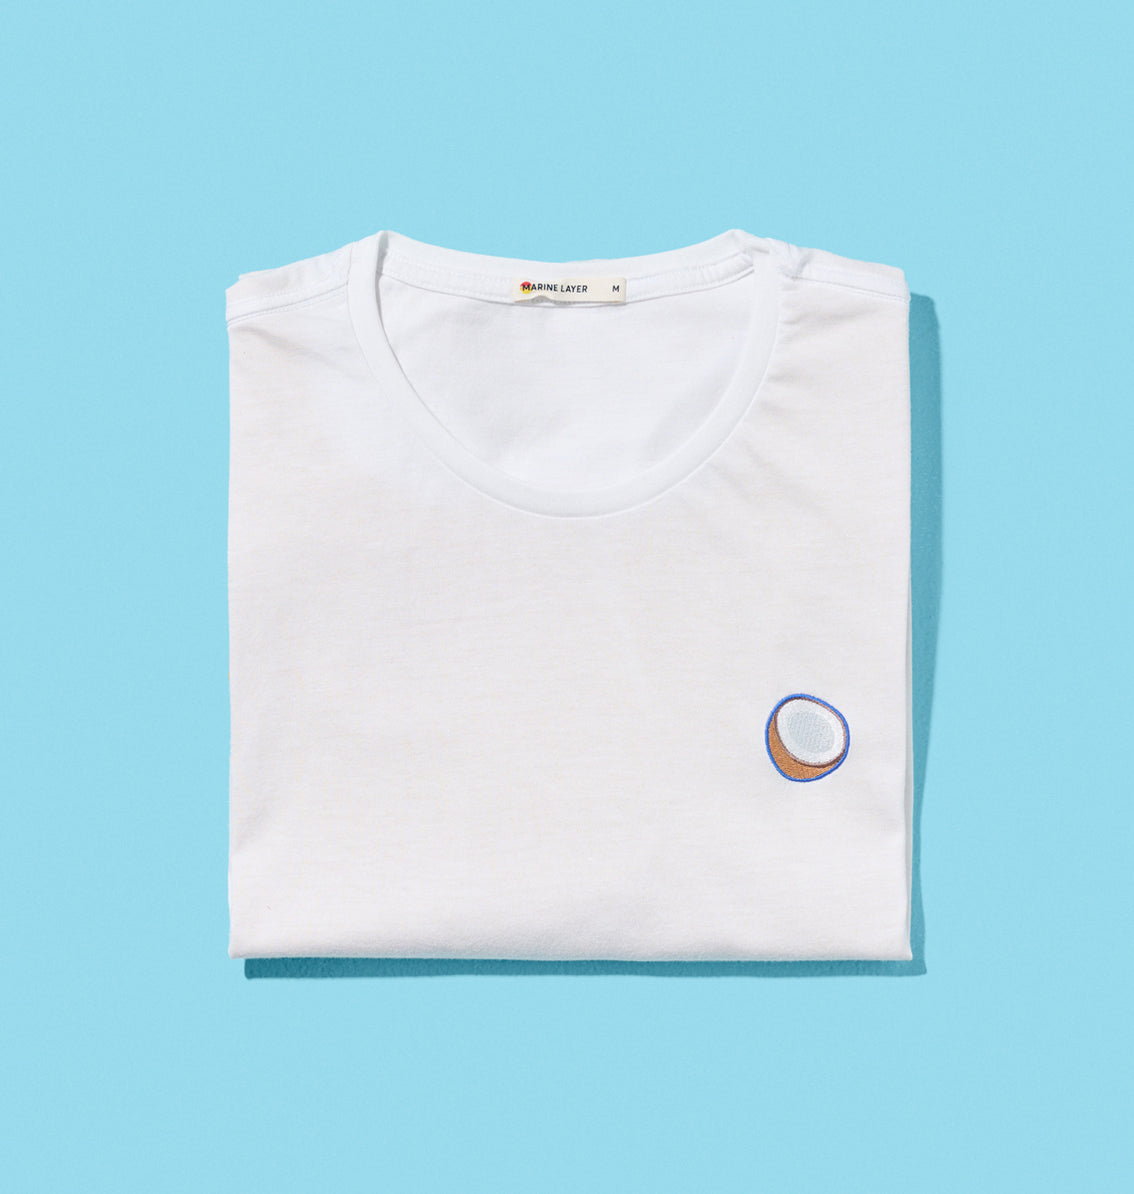 An embroidered Coconut Crewneck Tee with a Vita Coco coconut goodness circle design, perfect as a wardrobe staple.